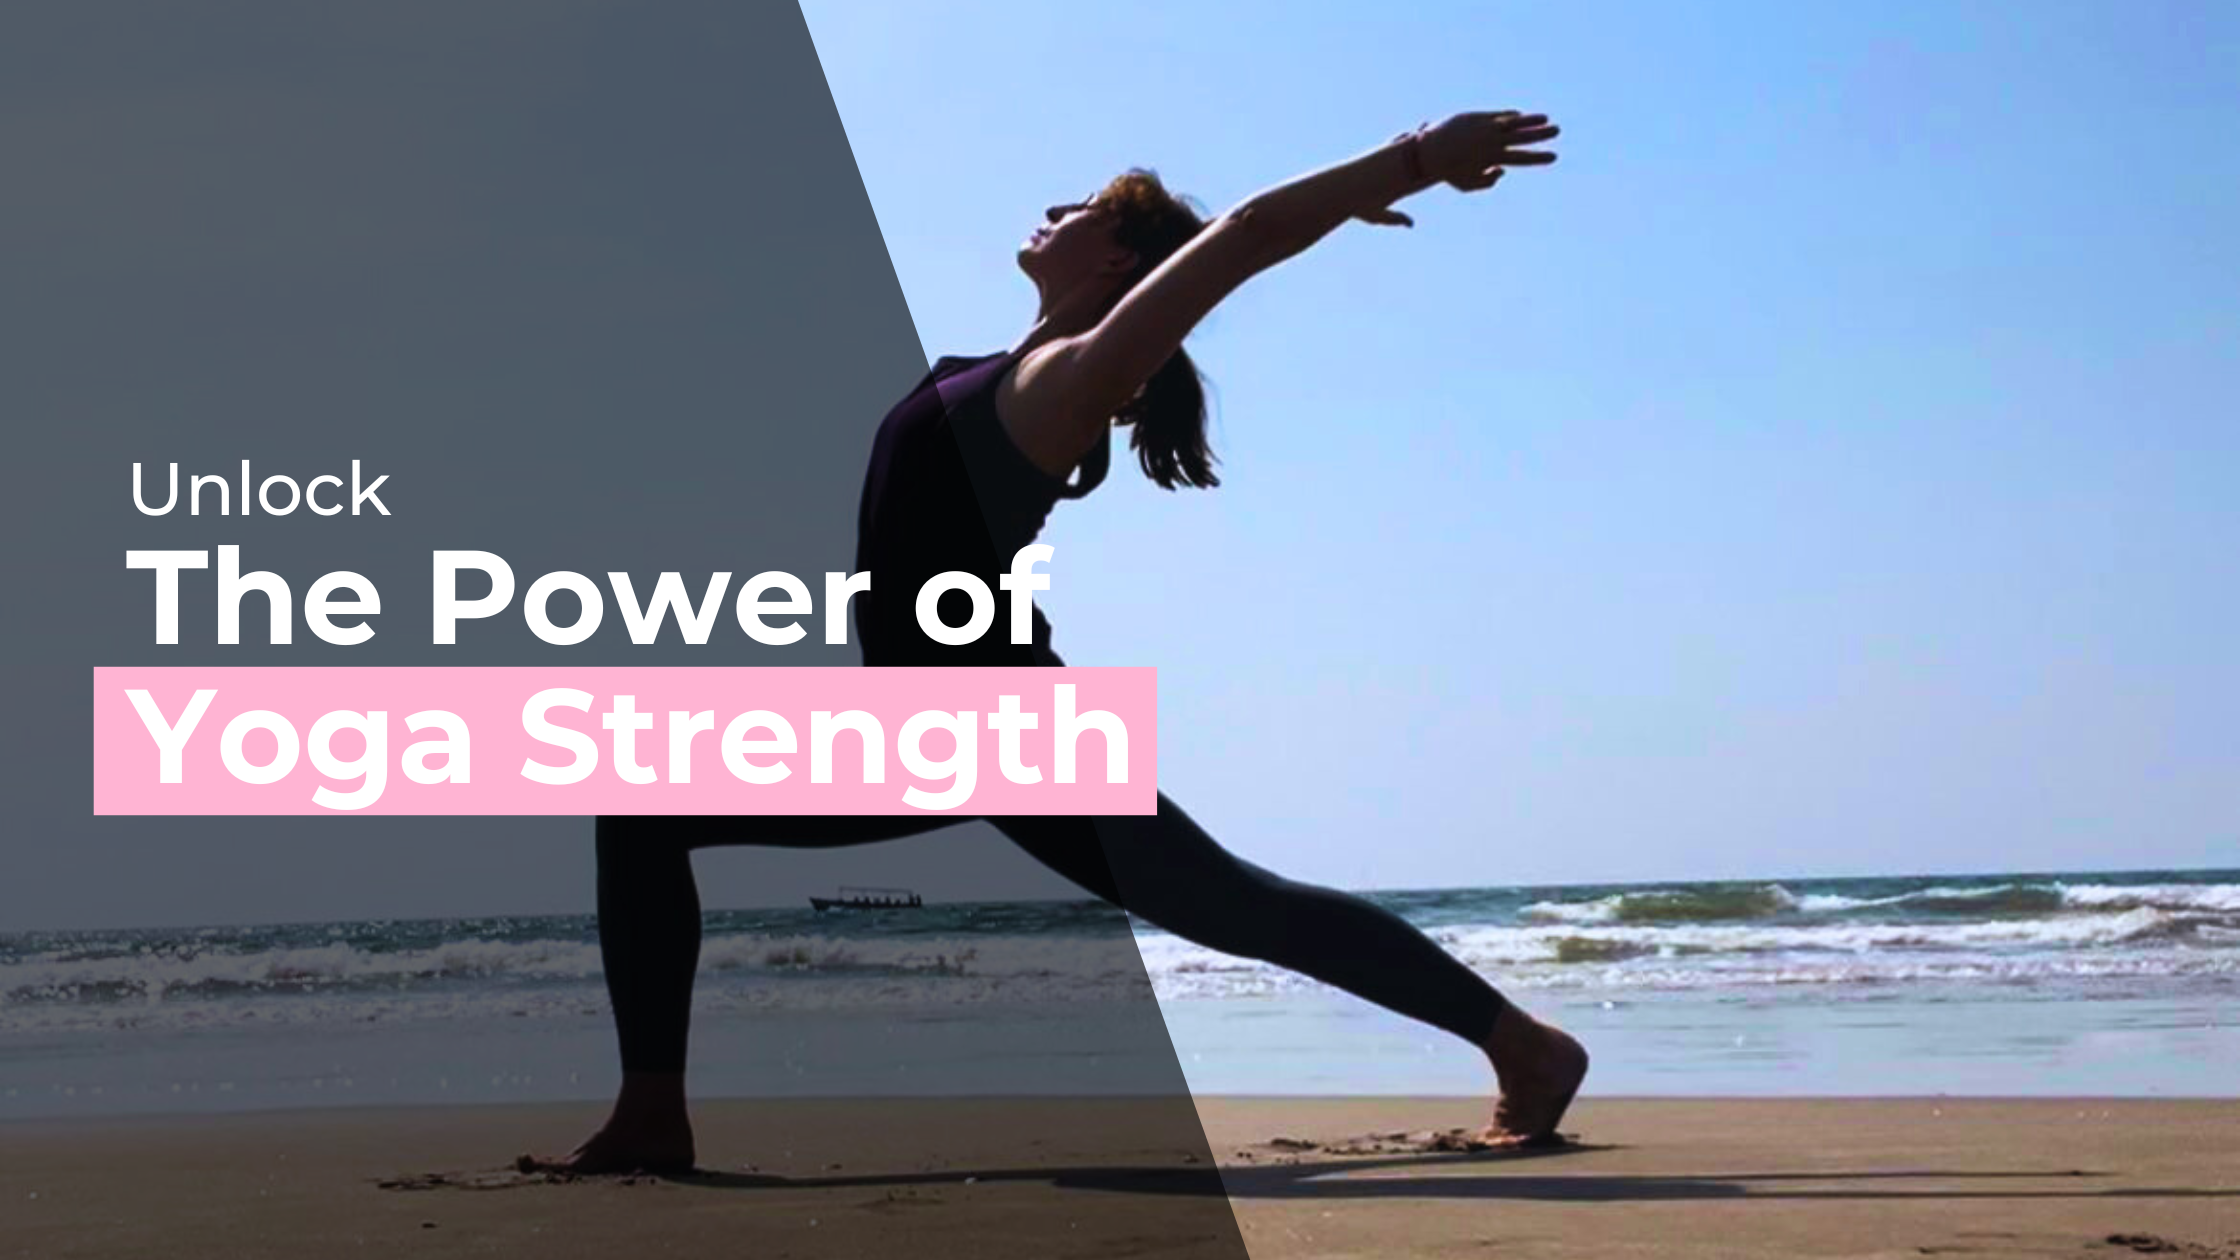 Image of a woman doing Yoga Strength Pose in the beach with text: Unlock The Power of Yoga Strength